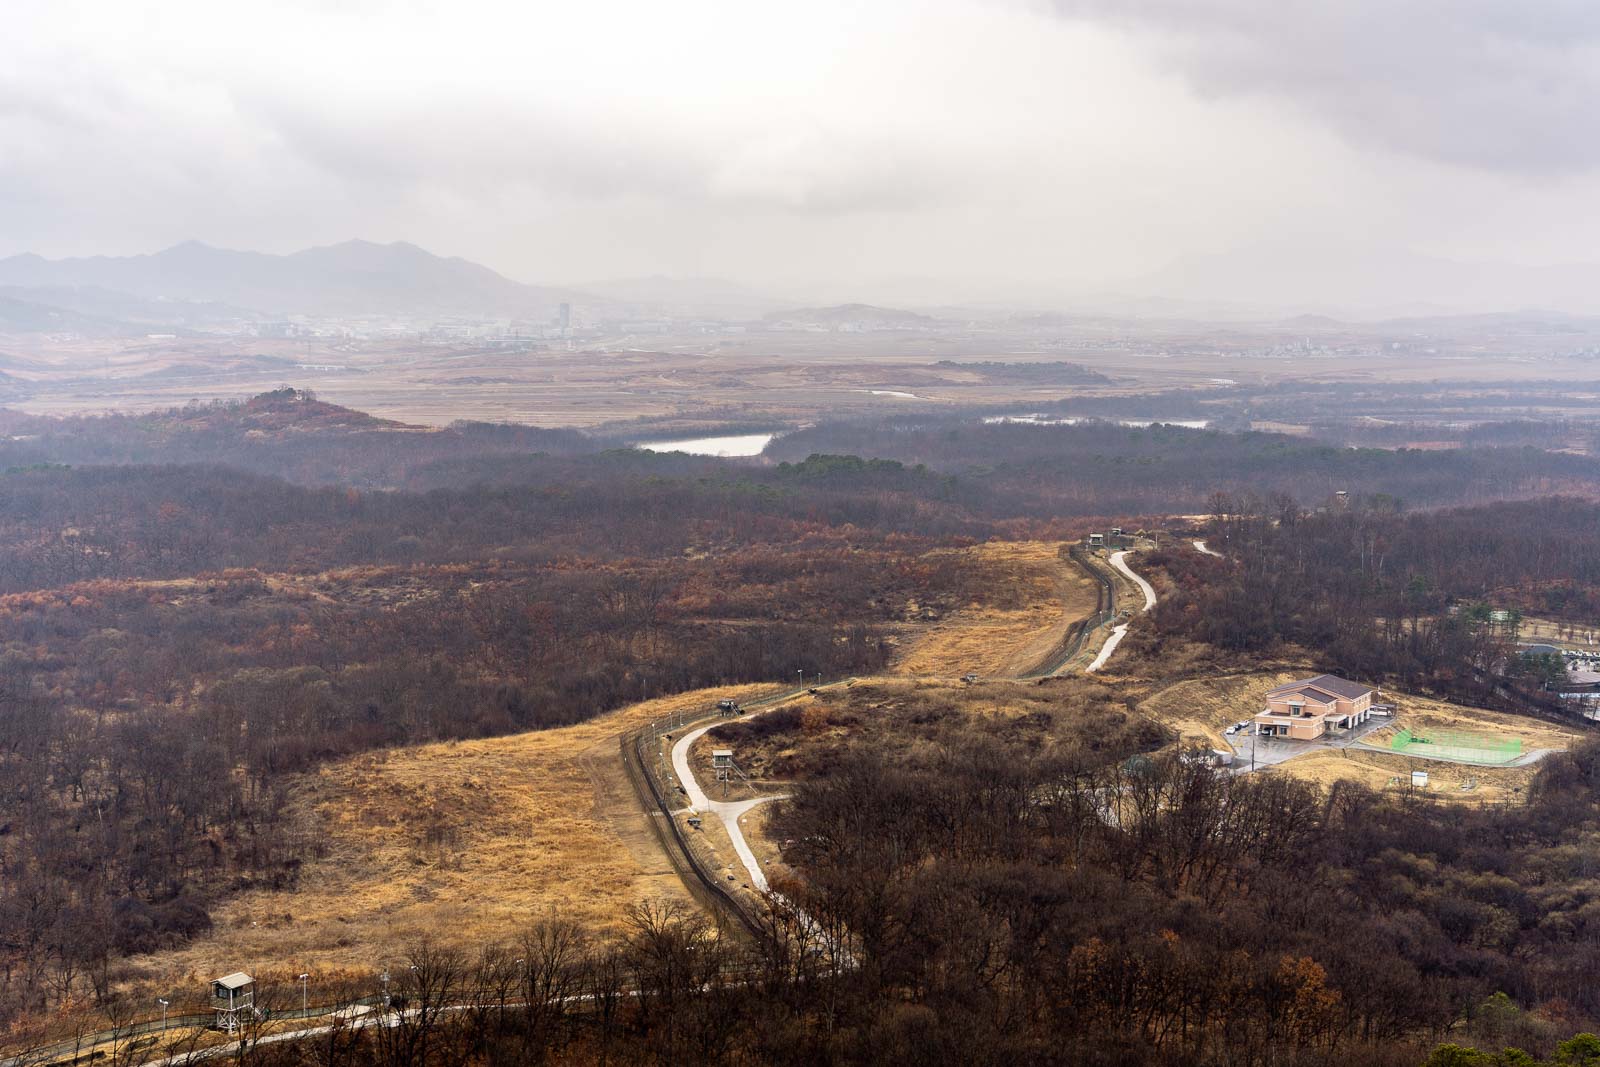 View of the DMZ